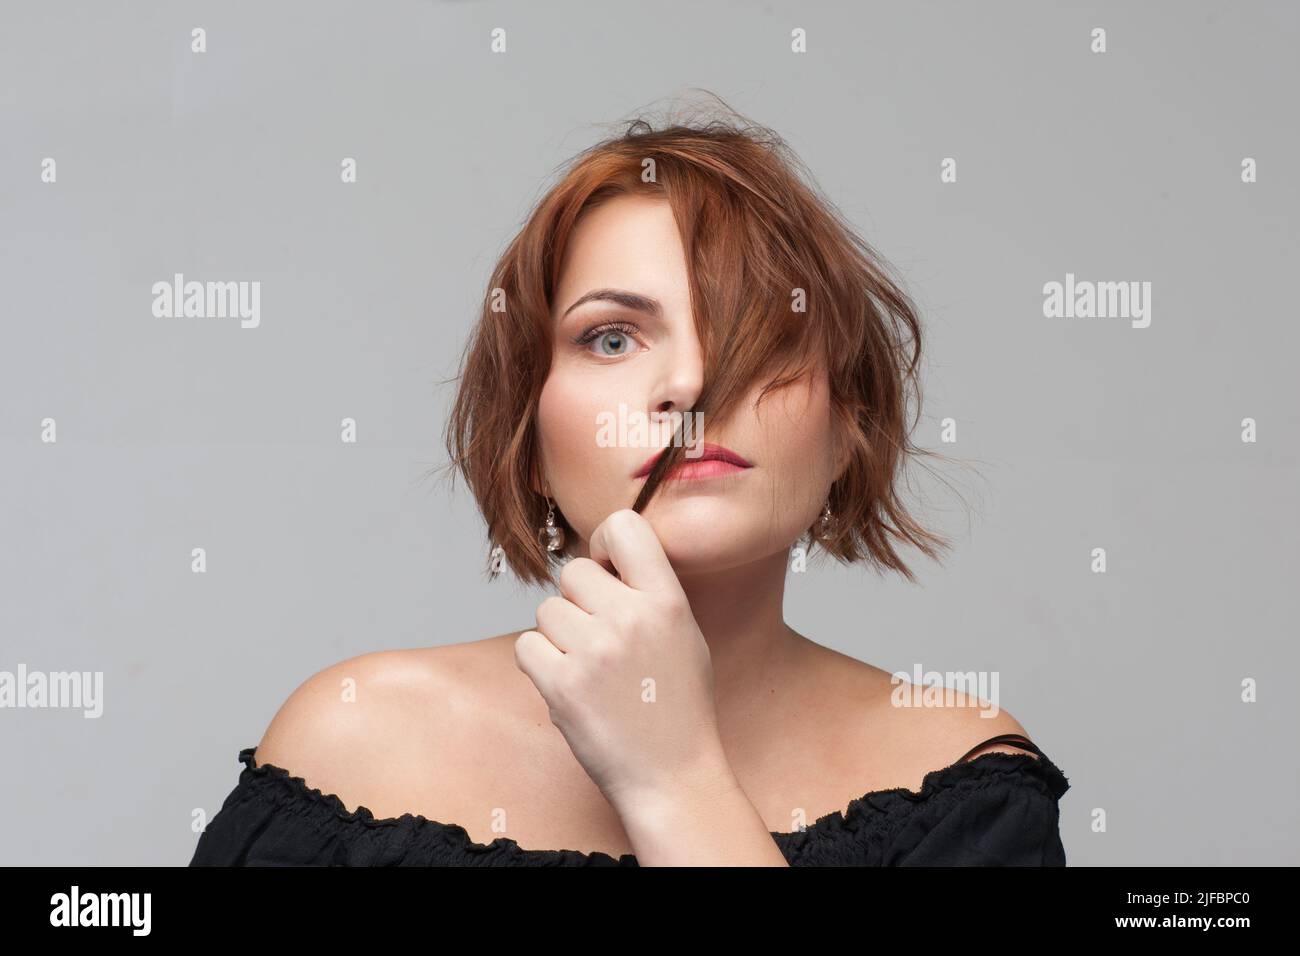 Ashamed of appearance. Hair problems Stock Photo